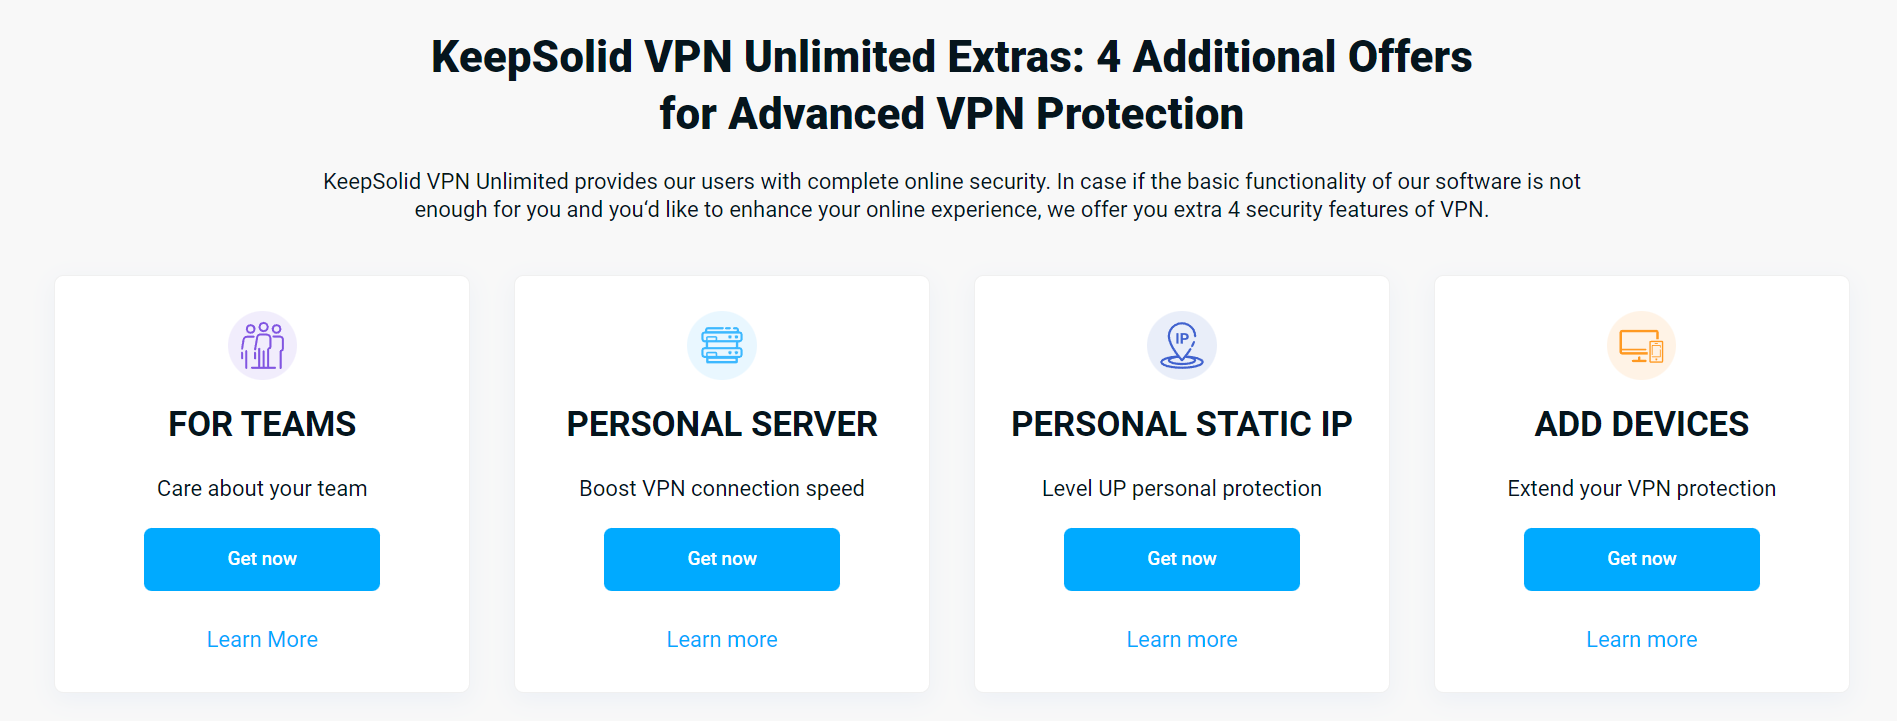 How many devices can I use with VPN Unlimited?